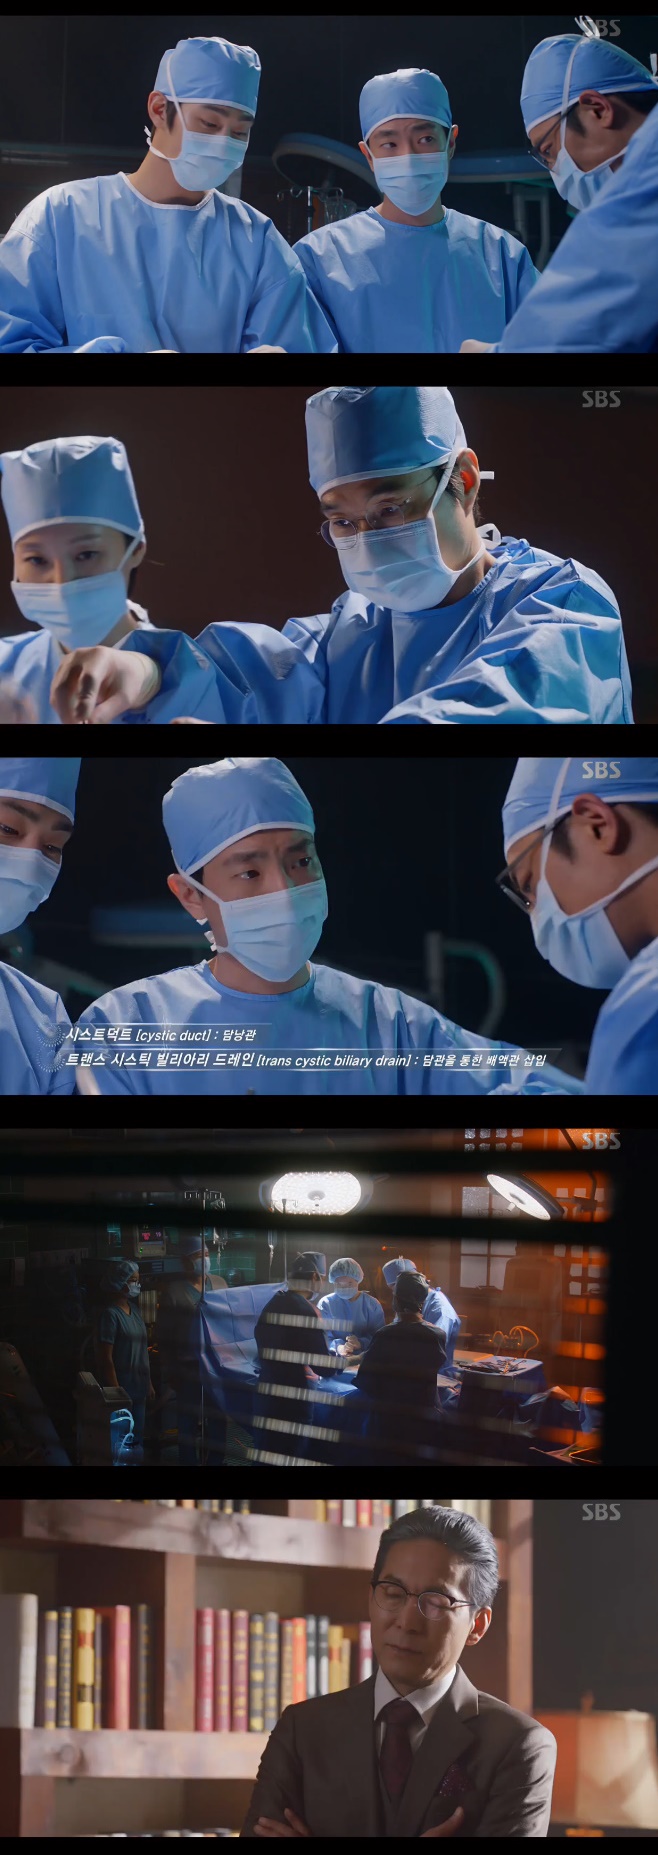 As the romantic doctors Kim Sabu 2 Lee Sung-kyung and Ahn Hyo-seop were recognized by Han Suk-kyu, they suggested that the new family would stay at Doldam Hospital for a long time.In SBSs drama Romantic Doctor Kim Sabu 2 (playplayplay by Kang Eun-kyung and director Yoo In-sik), which aired on the 14th, the stories of people at Doldam Hospital were drawn.On the same day, Seo Woo Jin (Ahn Hyo-seop) entered the operating room as a staff member of the ministerial surgery conducted by Park Min-guk (Kim Joo-heon) of the Geosan University Hospital.Earlier, Han Suk-kyu told Seo Woo Jin to go to the operating room to help Park Min-guk on behalf of the surgery-wound Cha Eun-jae.However, Cha Eun-jae, who did not know this fact, felt betrayed by Seo Woo Jin. In fact, Cha Eun-jae, who had been drugged because of the depression, was asleep all the time in the hospital.In the operating room, Seo Woo Jin told Park Min-guk about various situations at the time of the first operation.Seo Woo Jin said that the patient s condition deteriorated sharply when the situation was urgent and the minister started surgery without taking CT.Park Min-guk asked, How did you catch this without CT? And Seo Woo Jin did not answer.The minister, Son, blamed Kim Sabu, who had not taken CT and went into surgery, saying, If you did not have yourself, you should have sent me to a big hospital.If I was more worried about the title than a patient as a Physician, I would have chosen to die instead of surgery, Kim said.Your fathers condition would have been more comfortable. The minister, Son, declared that he would sue Kim Sabu and Doldam Hospital for medical malpractice.When I heard that Oh Myung-sim (Jin Kyung), Jang Gi-tae (Im Won-hee) and Nam Do-il (Byeon Woo-min) had taken a second surgery video at Geosan University, I met with Seo Woo Jin.Jang Gi-tae asked Seo Woo Jin if he answered the question against Kim Sabu and asked if he received money from the Geoje University.So Seo Woo Jin went to Kim Sabu with arsenic. Seo Woo Jin, who misunderstood Kim Sabu, said, If you ask me questions, why not ask them yourself?Did you test it to see how I was doing in the operating room? Kim was embarrassed.Since then, Kim has found Cha Eun-jae, who copes with emergency patients in the emergency room.After the crisis, Kim mentioned the story he had seen in the emergency room of the Geosan University Hospital and asked, Why was there at that time? Cha said, I was mainly in the emergency room when I was on duty.I dont know if I ever ran out of the emergency room, Cha said. Its all right if its not just the operating room.Kim ordered the patient to receive the first patient of Cha Eun-jae, and impressed Cha Eun-jae.Im sorry as an adult, but Im not pushing you like that without evidence, he said, when he visited Seo Woo Jin and apologized.If he was such a person, he would chase the money, he would not have found the answer. Meanwhile, Minister Son asked Park Min-guk for a copy of the second surgery recording.When asked if the testimony related to the first surgery would be in the video, Park Min-guk and Yang Ho-joon said that there is no video about their fault.At that time, Cha Eun-jae asked Yang Ho-joon, Is this USB right? And found out that there was an operation video in USB.The video showed a more disadvantageous situation on the side of the hospital at Geosan University, and the minister, who learned the fact, visited Kim Sabu and apologized.Kim, who confirmed the second copy of the operation, paid the first ten million won that Seo Woo Jin had requested. How many months of prepayment? Kim said to Seo Woo Jin, My money.Youre going to have to pay me a million won a month, he said.